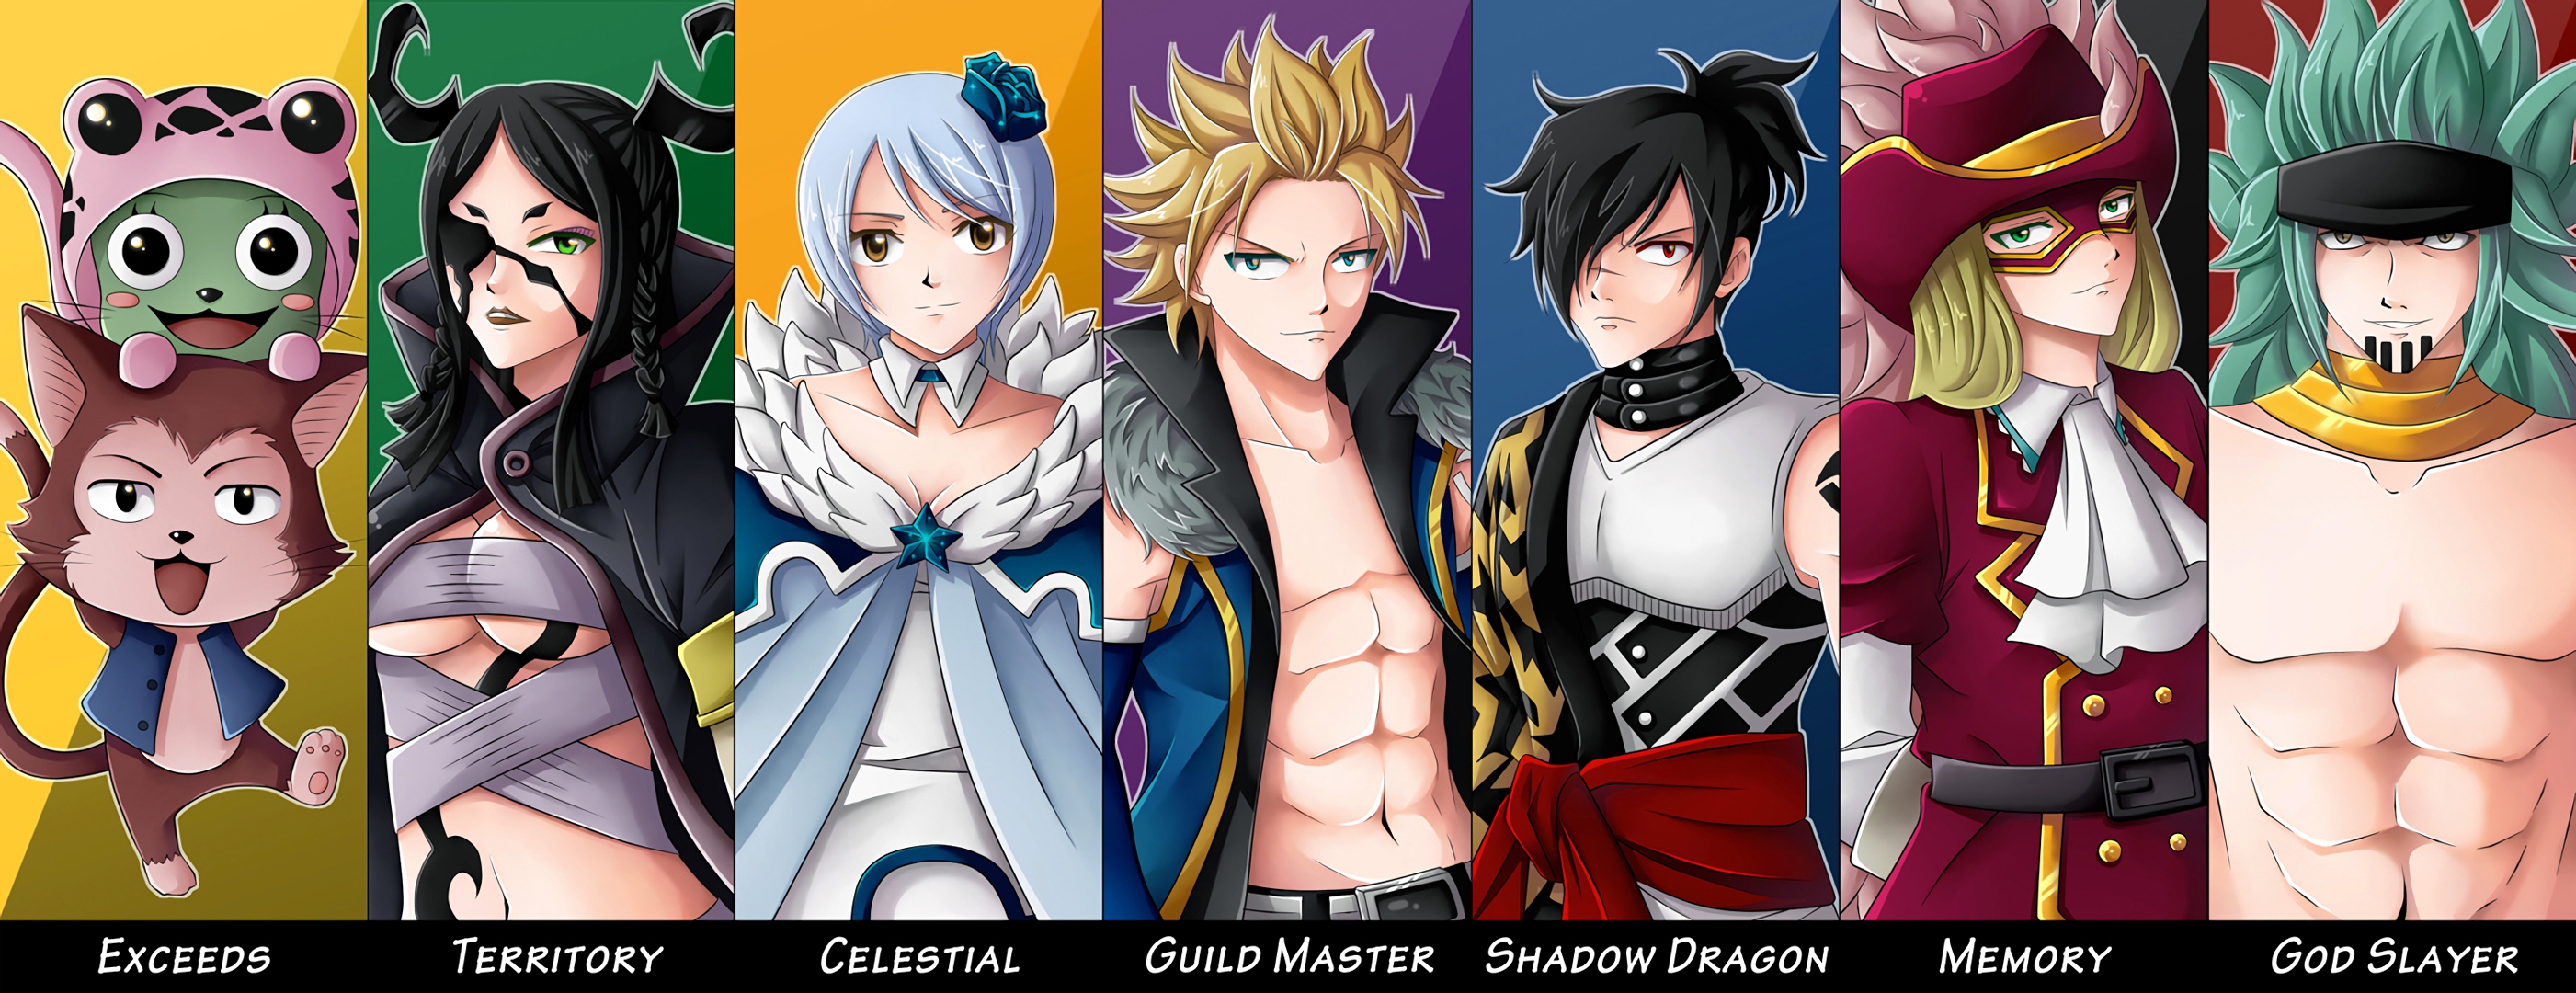 Frosch Fairy Tail Lector Fairy Tail Minerva Orland Yukino Aguria Sting Eucliffe Rogue Cheney Rufus L 2802x1080